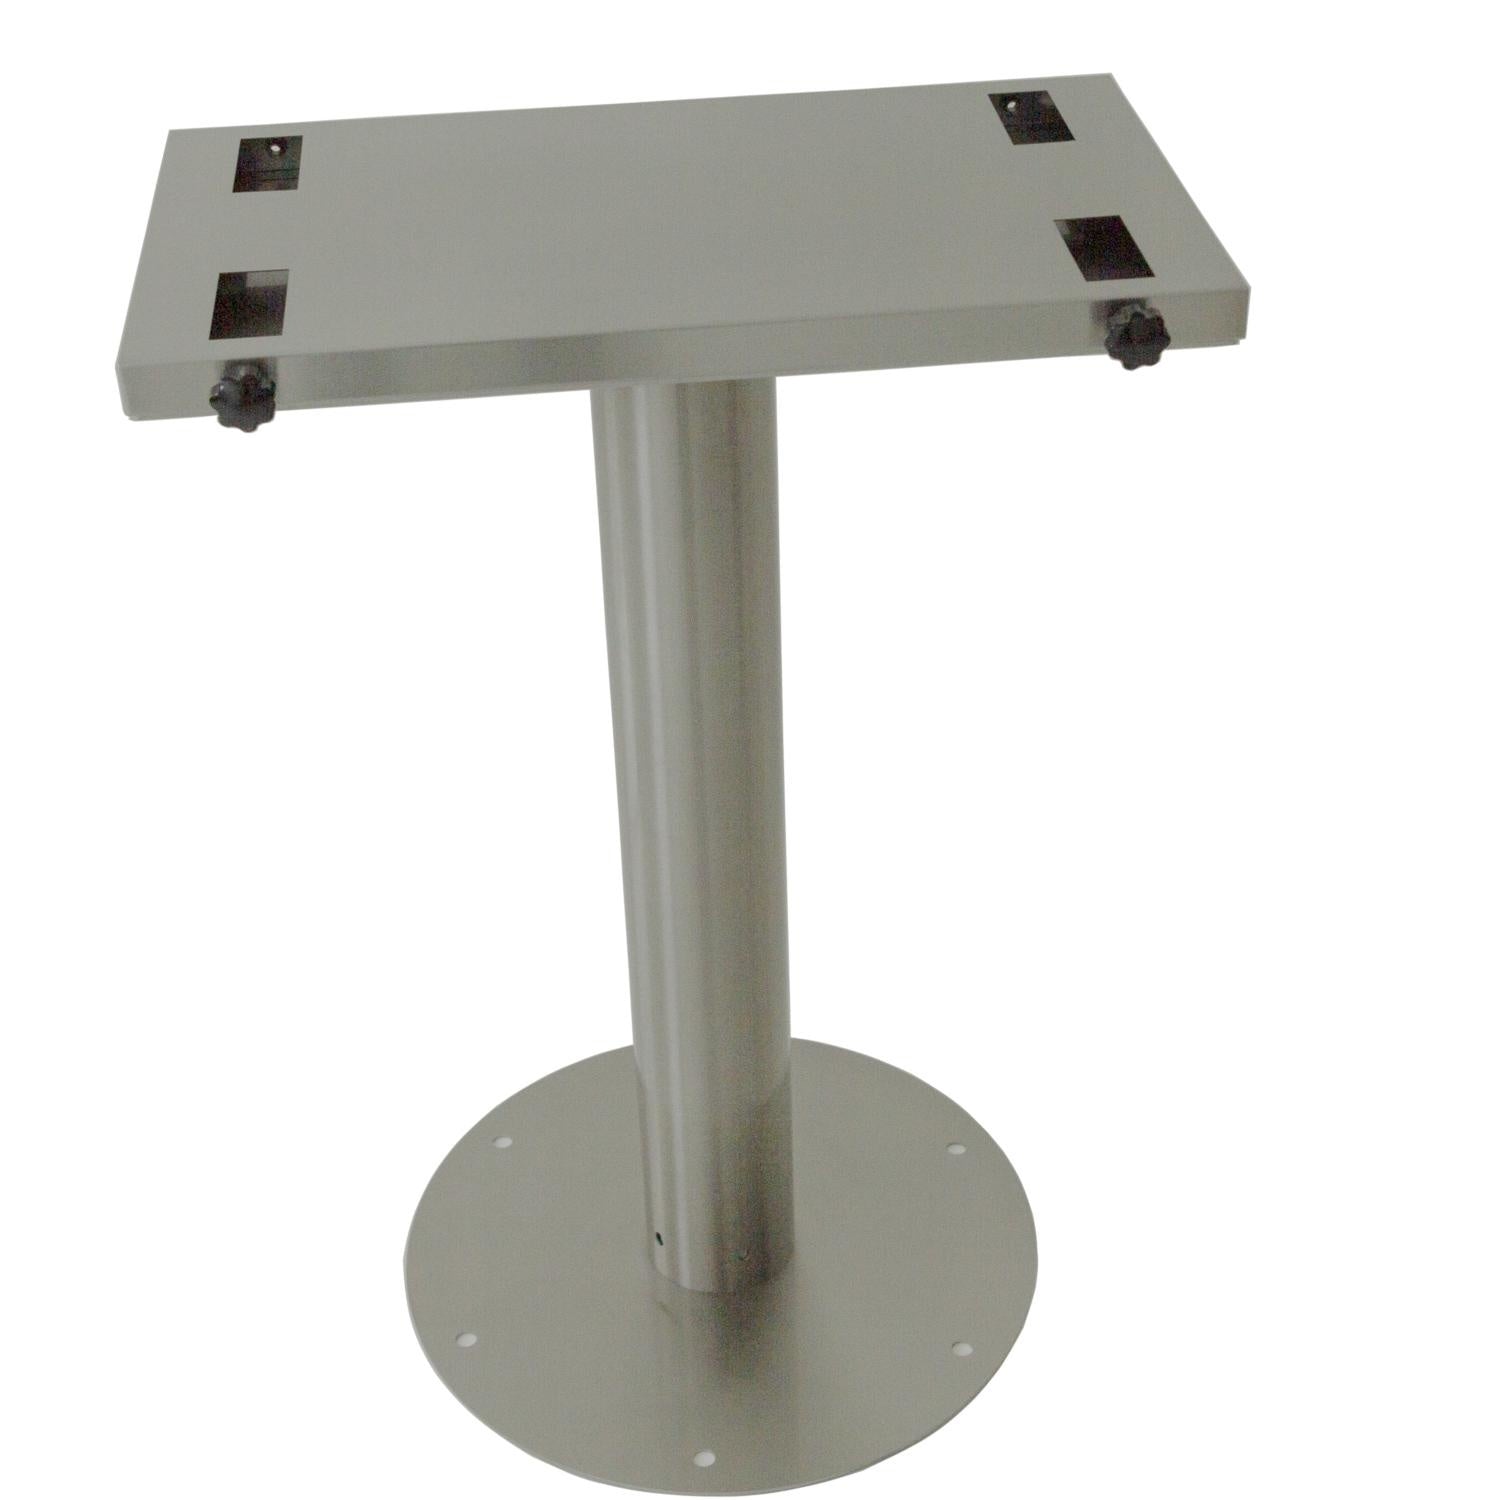 Blaze 17" Pedestal for the Portable Grill